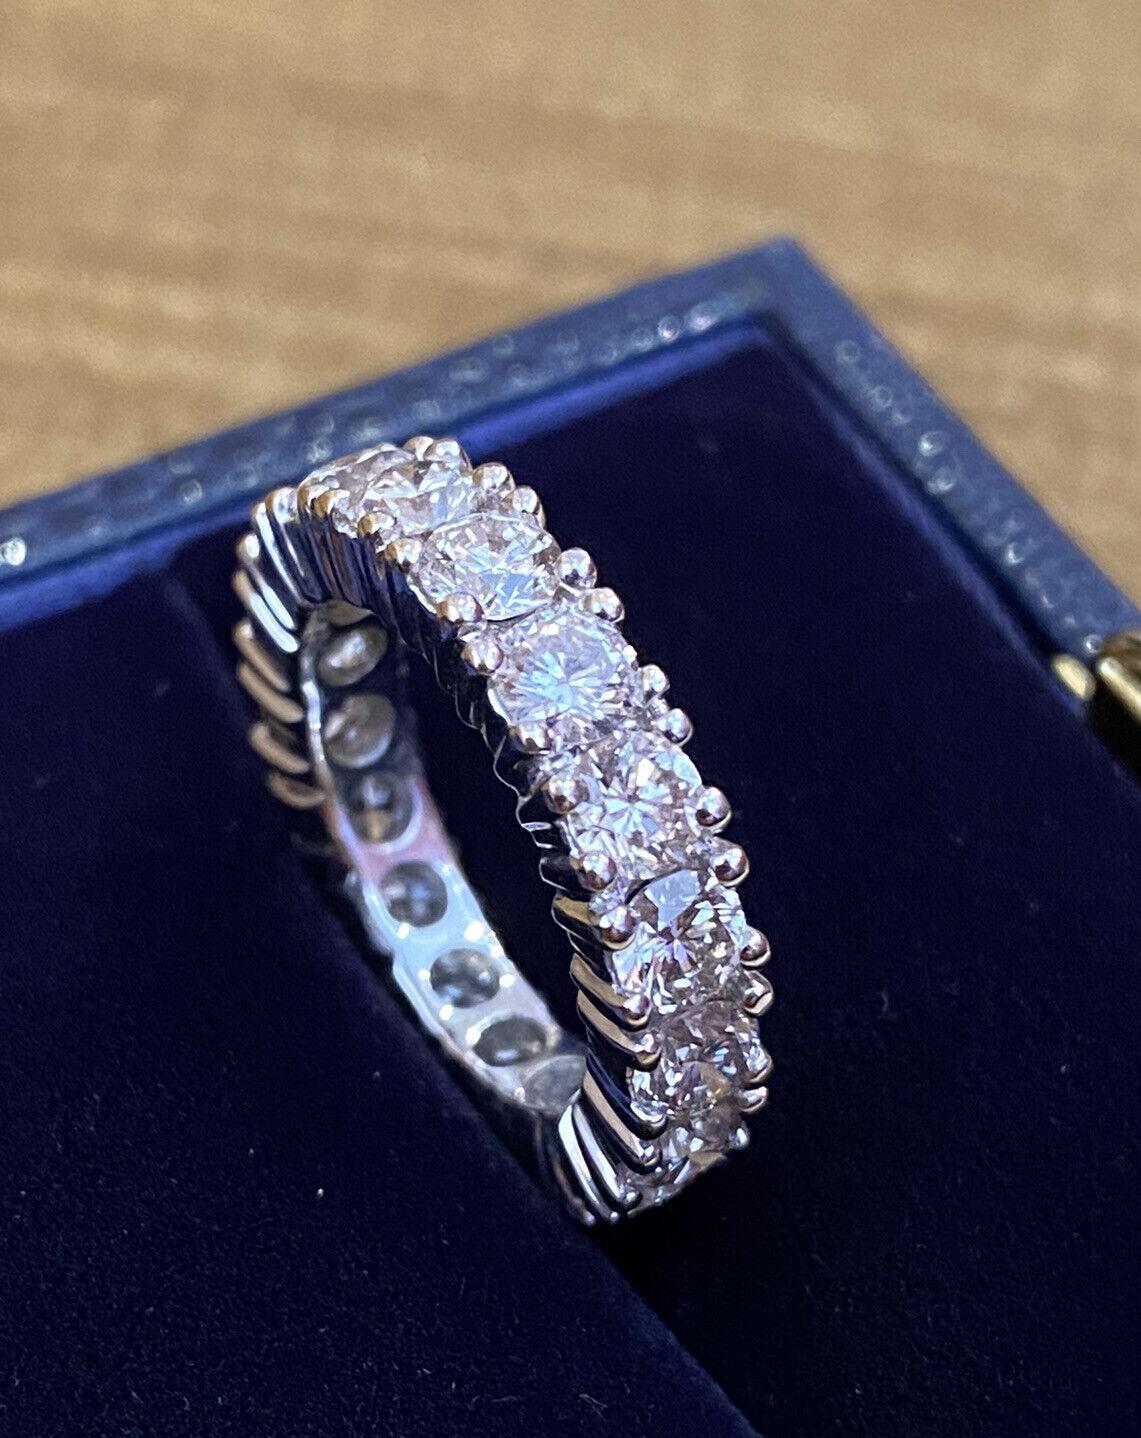 Round Diamond Eternity Ring 3.70 carat total weight 4.7mm in 18k White Gold

Round Diamond Eternity Ring features 17 Round Brilliant cut Diamond, each averaging 0.22 carats, set in a basket prong setting in high-polished 18k White Gold.

Total